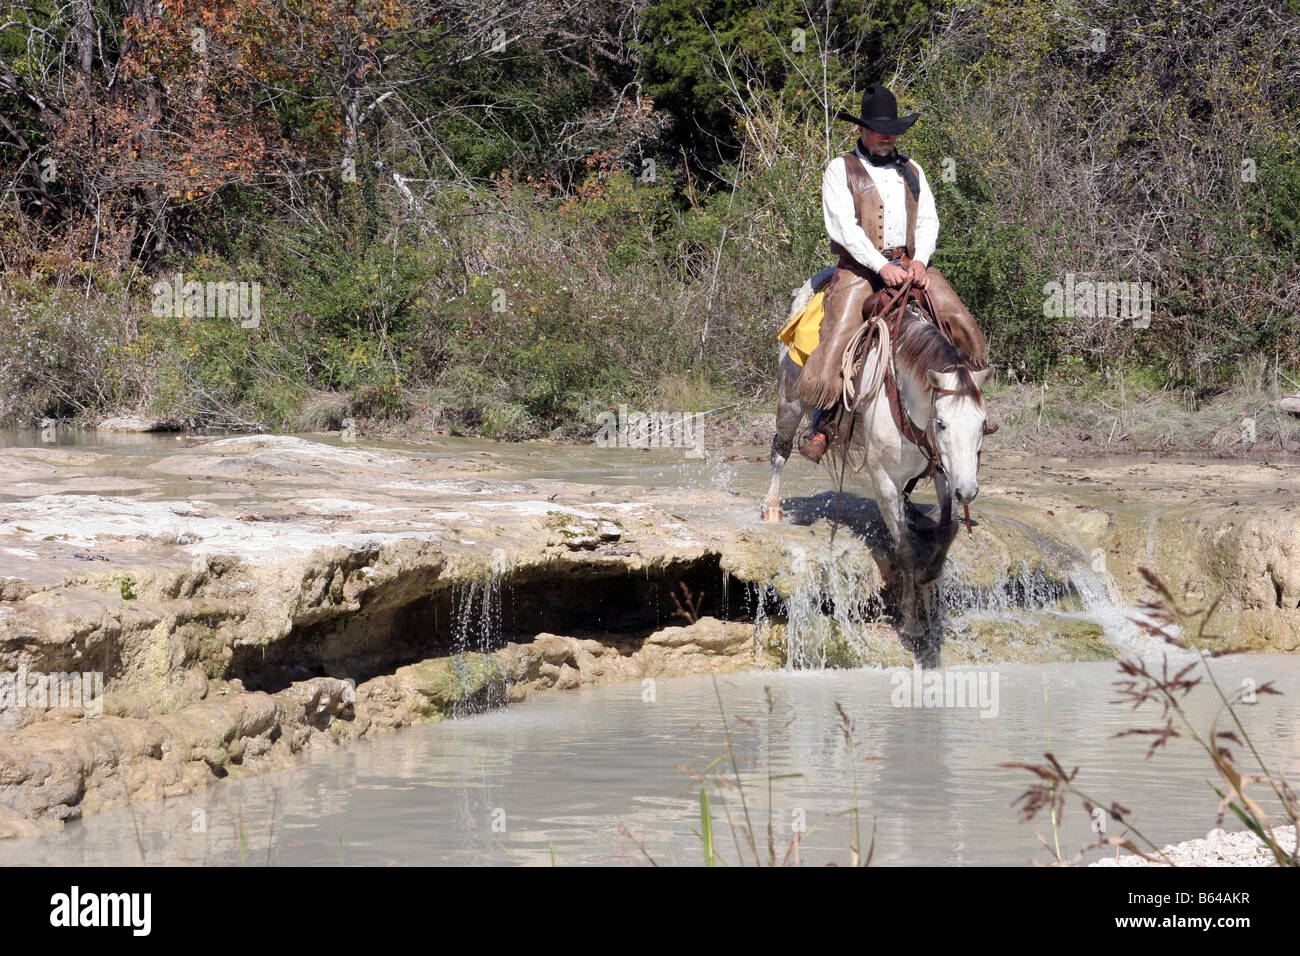 A cowboy and horse crossing a stream in Texas Stock Photo